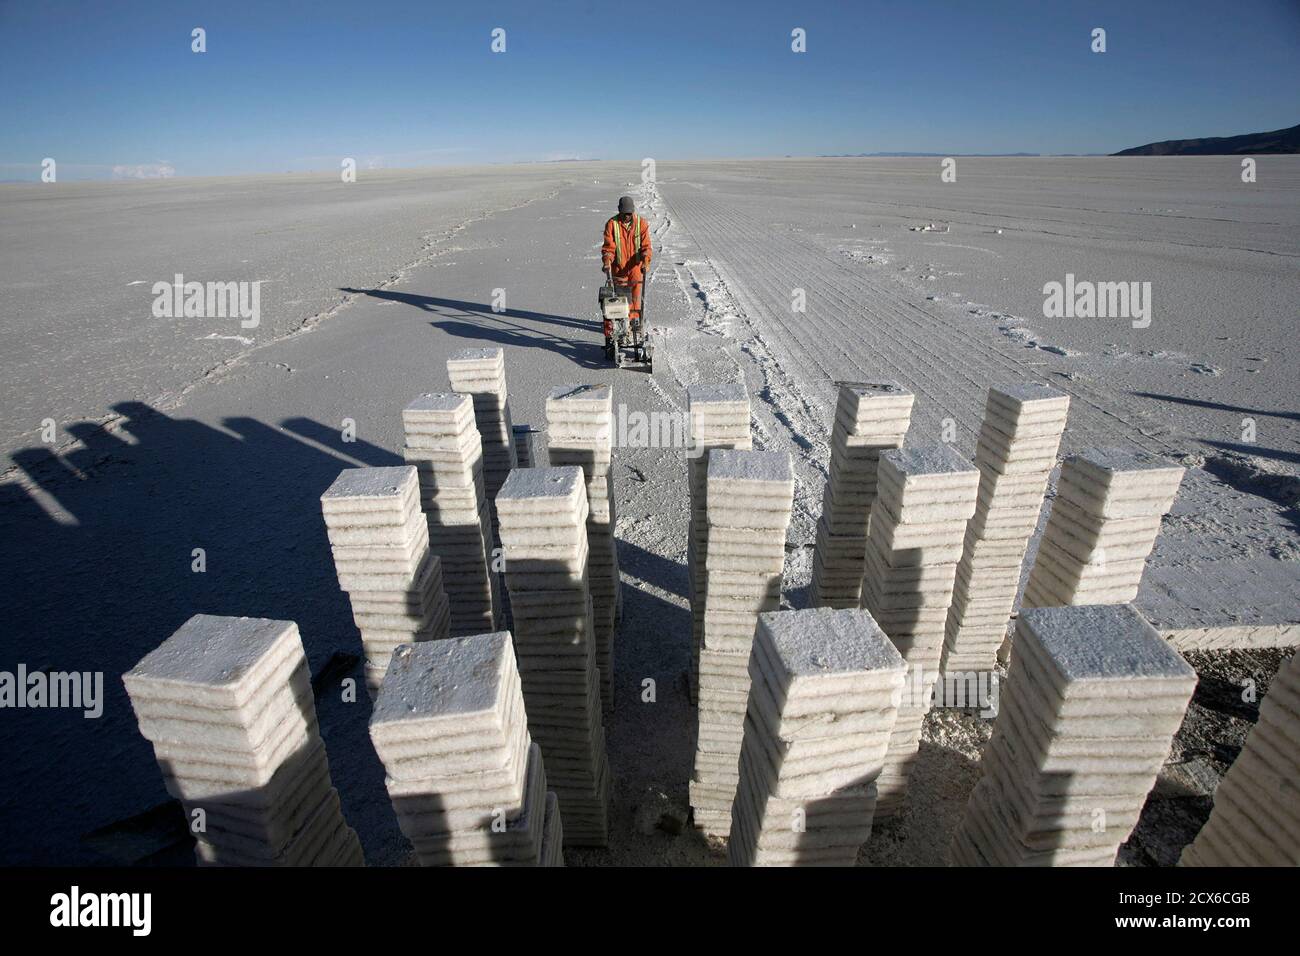 Blocks of salt are seen on Uyuni salt lake, which holds the world's largest reserve of lithium, about 500 km (311 miles), south of La Paz, November 28, 2010. Bolivia plans to build a plant to produce up to 30,000 tonnes a year of lithium carbonate from the Uyuni salt lake. Bolivia does not currently mine lithium, the main component of the rechargeable batteries that power products ranging from laptops to cameras. Picture taken in November 28, 2010. REUTERS/Gaston Brito   (BOLIVIA - Tags: BUSINESS ENERGY ENVIRONMENT) Stock Photo